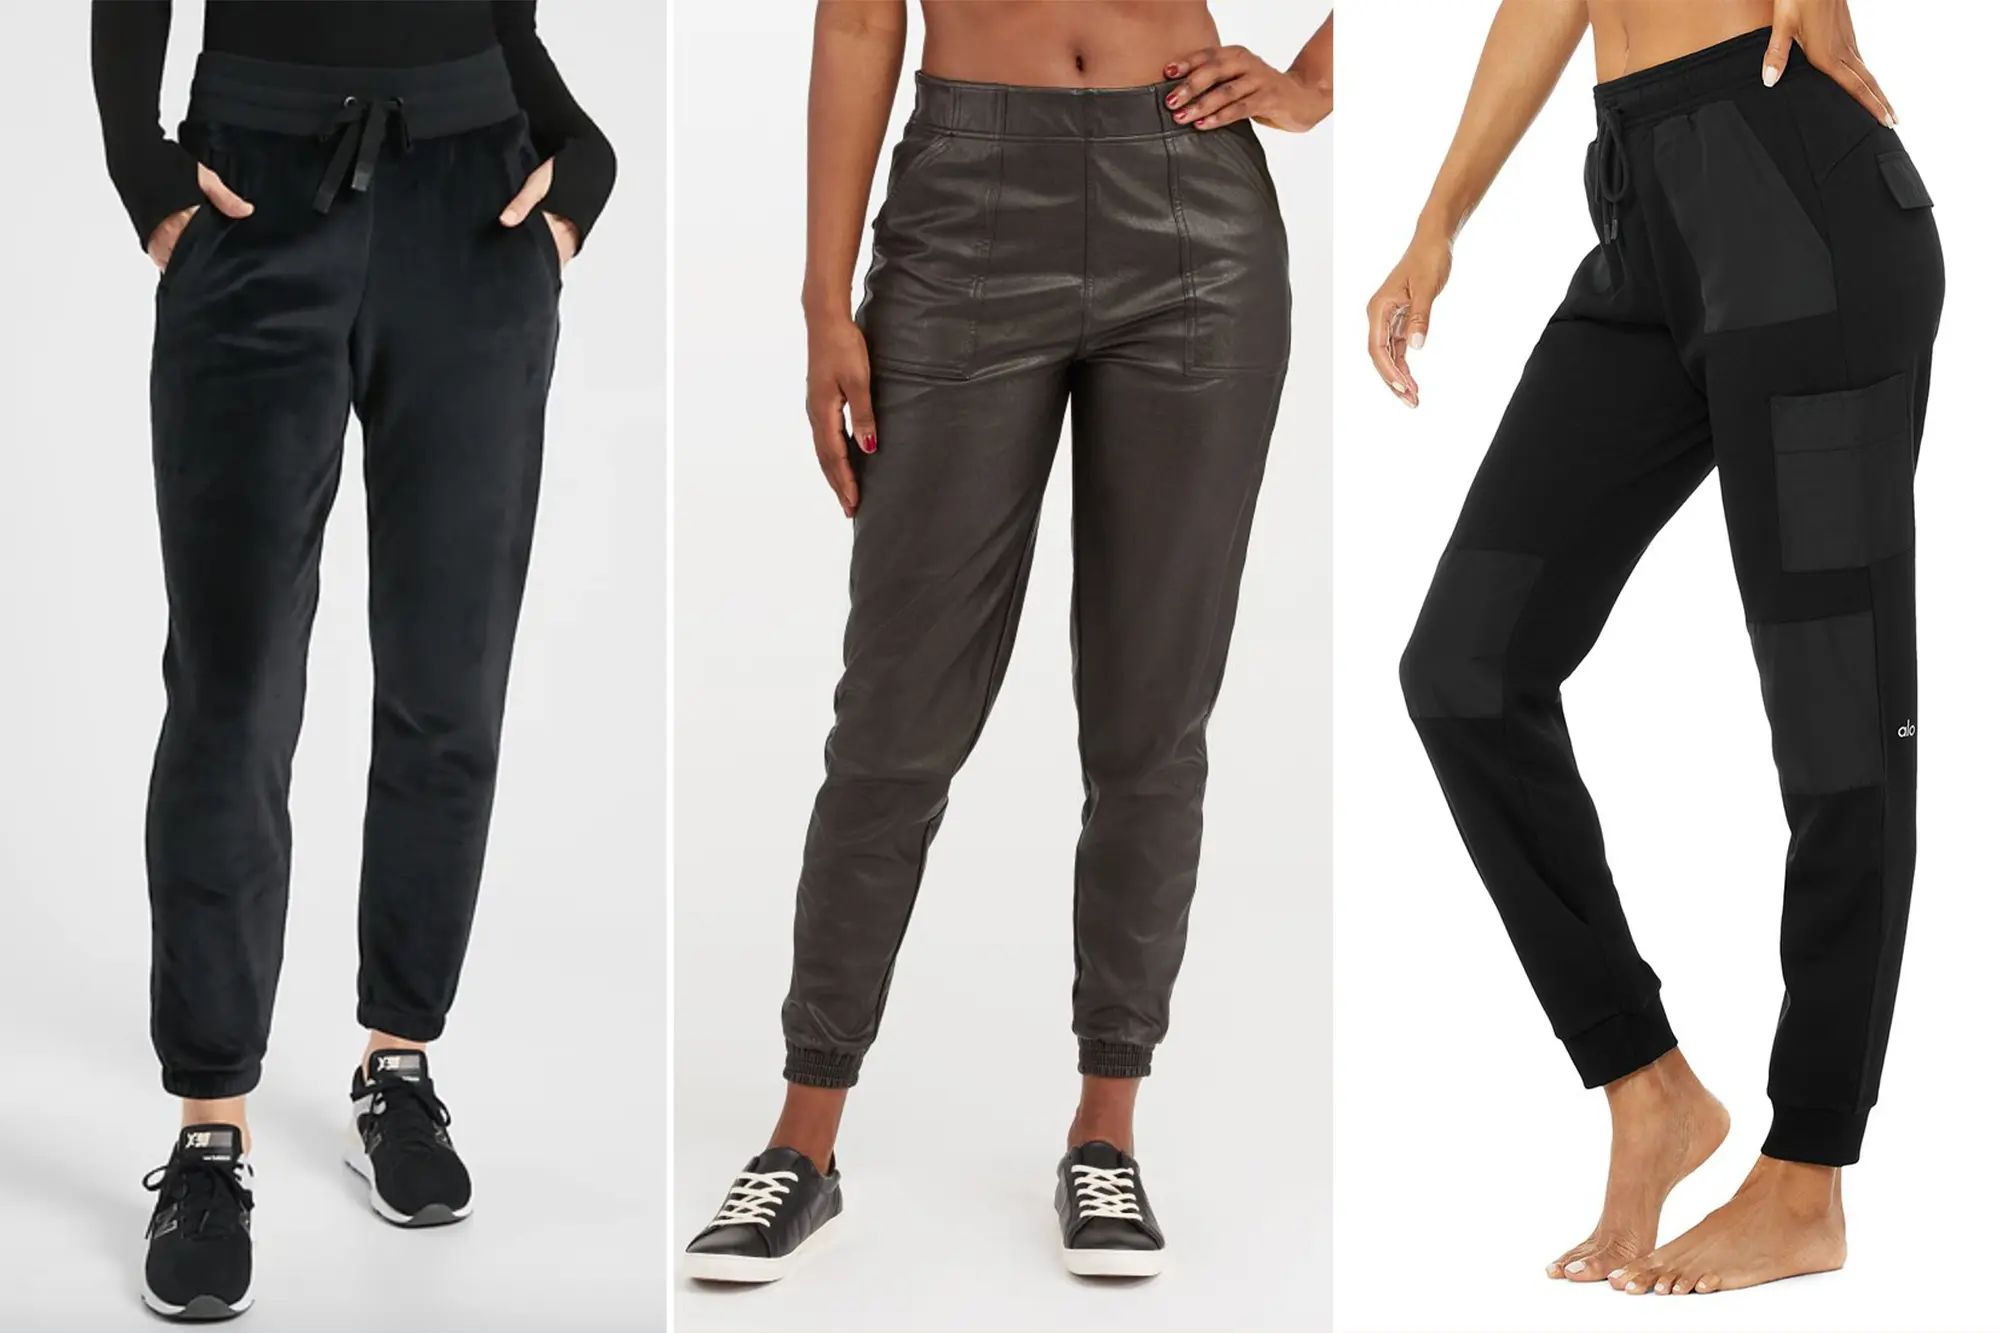 How To Dress Up Jogging Pants